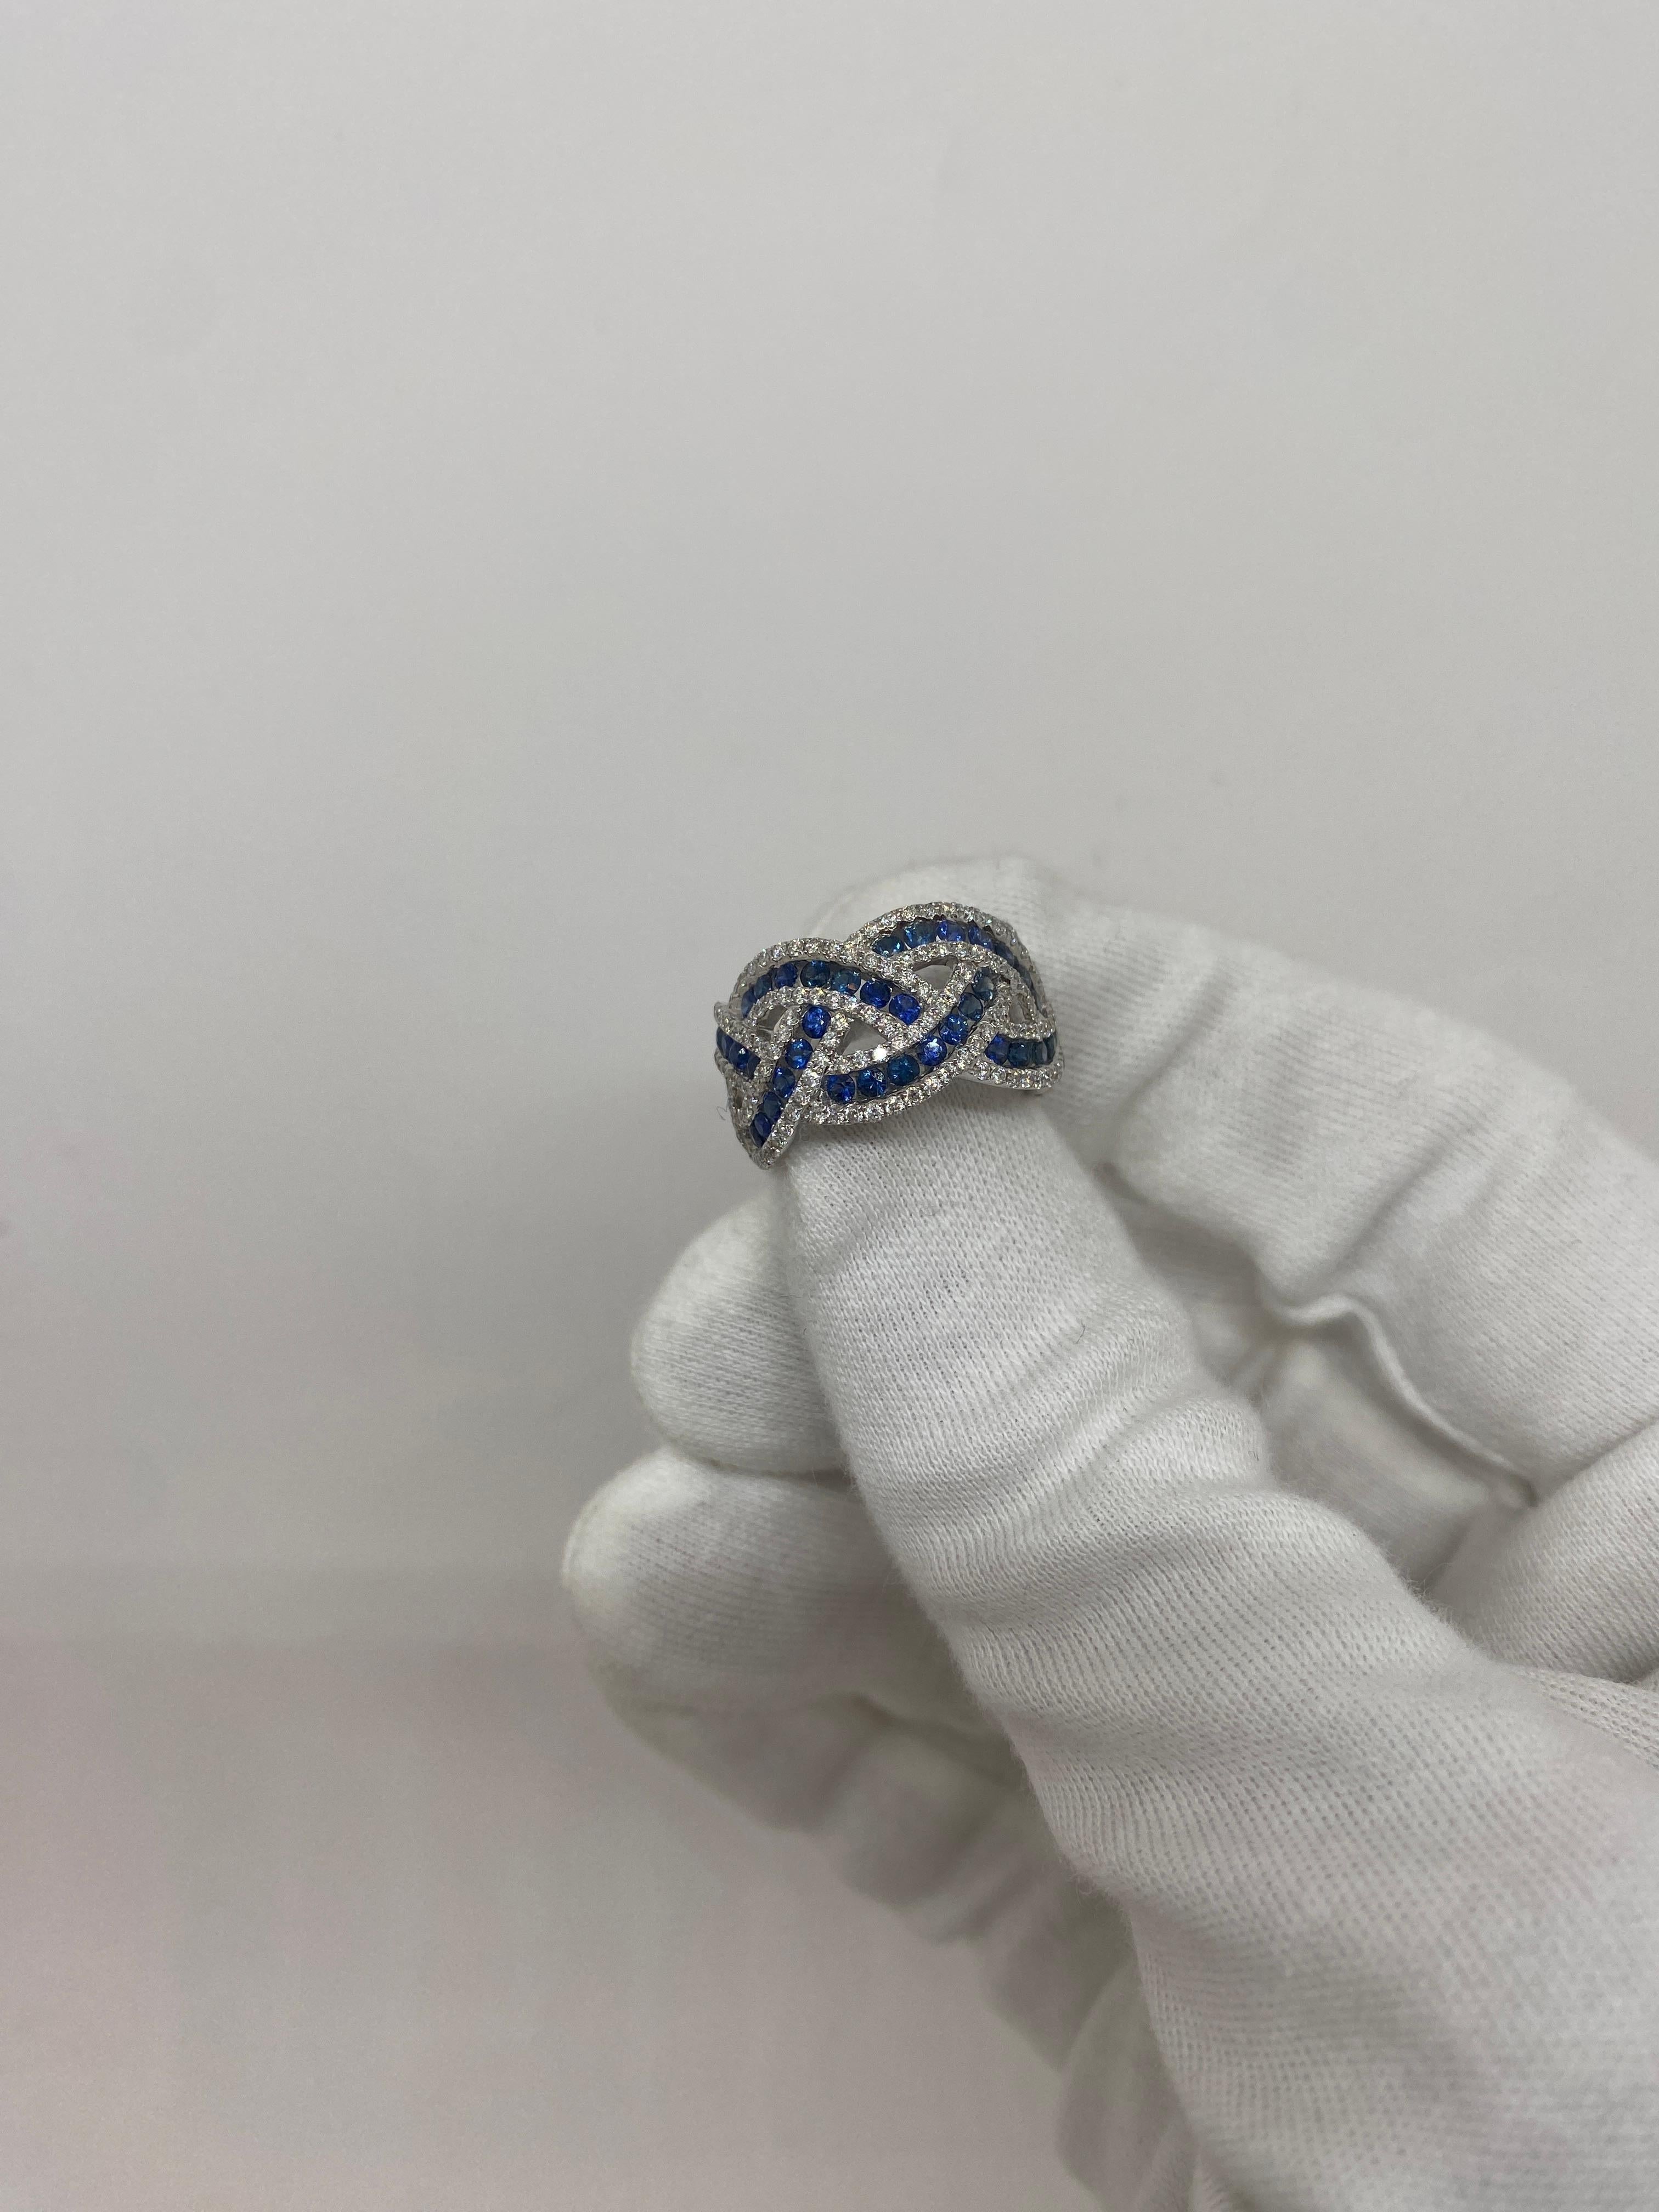 Band ring made of 18kt white gold with natural blue sapphires for ct.1.73 and natural white brilliant-cut diamonds for ct.1.07

Welcome to our Italian jewelry store, which has been in operation for over 100 years. Our passion for the art of jewelry